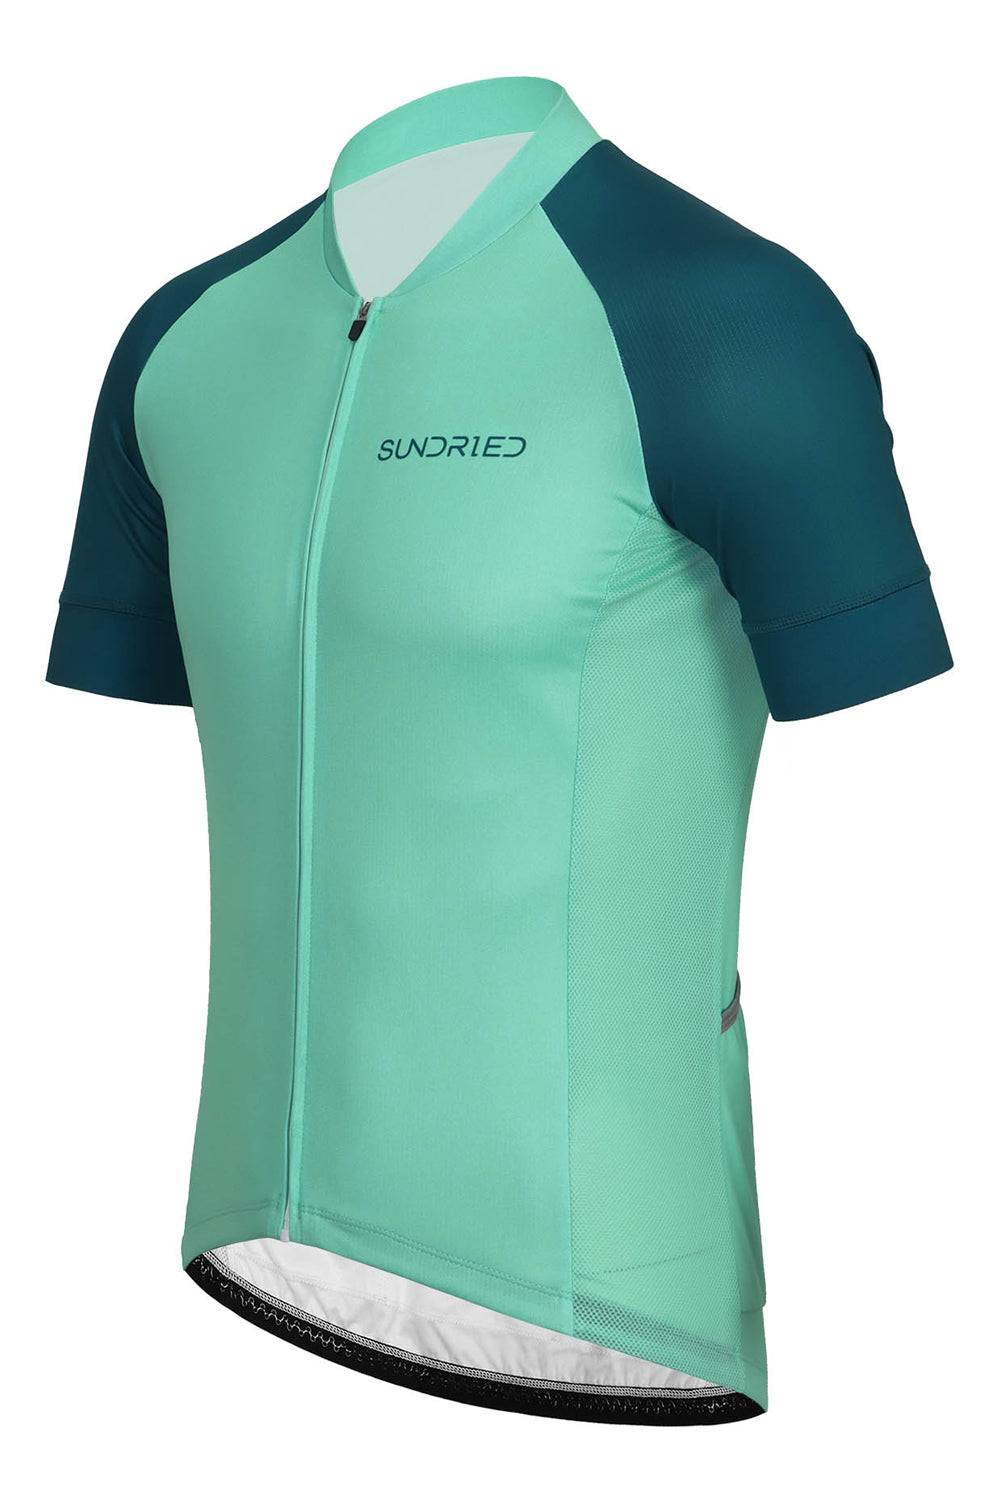 Sundried Classic Men's Short Sleeve Training Cycle Jersey Short Sleeve Jersey Activewear